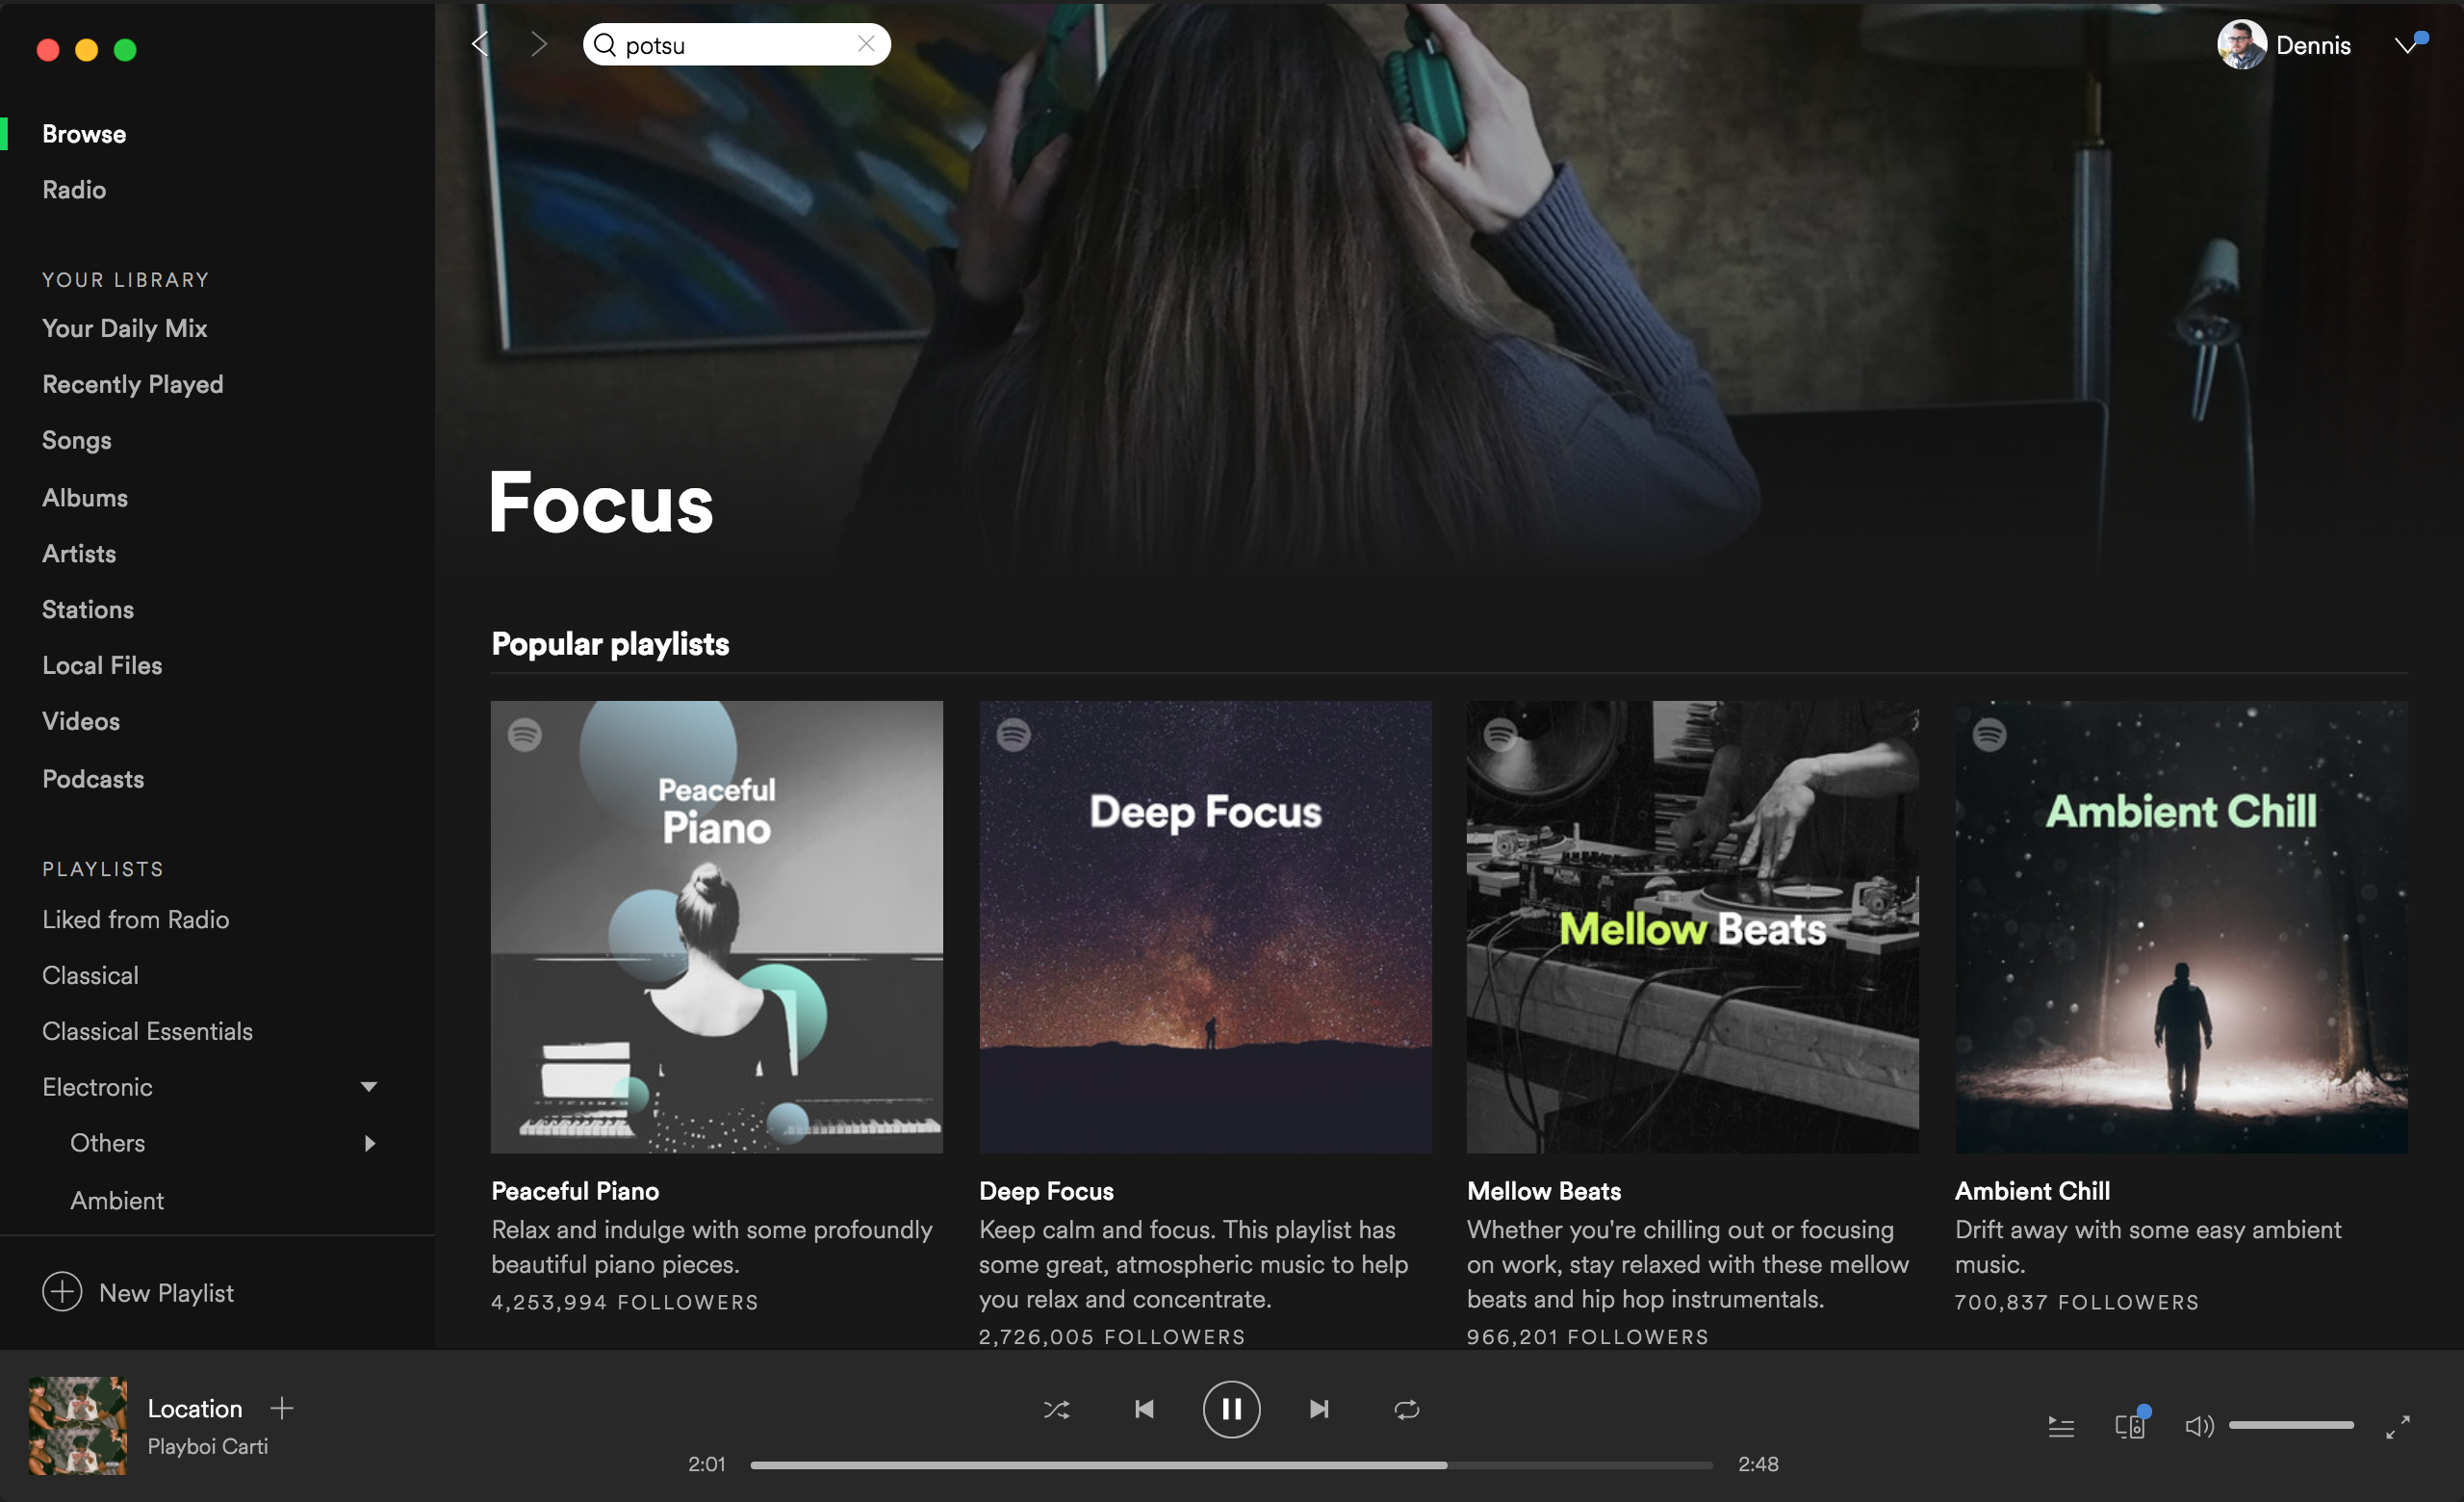 Overview of Spotify dashboard